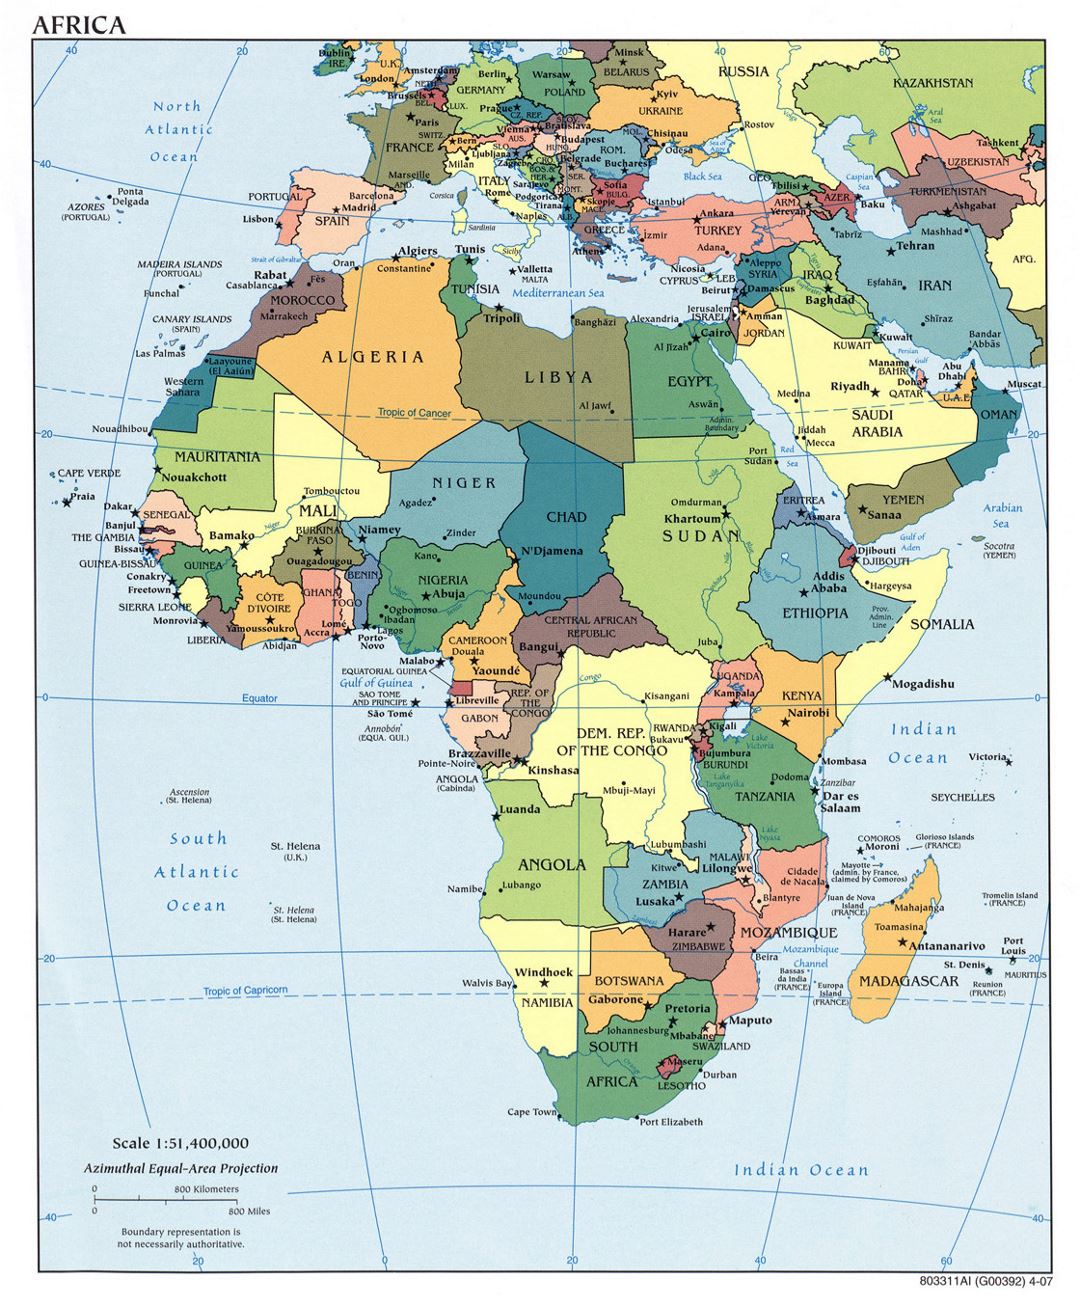 Detailed political map of Africa with major cities and capitals - 2007